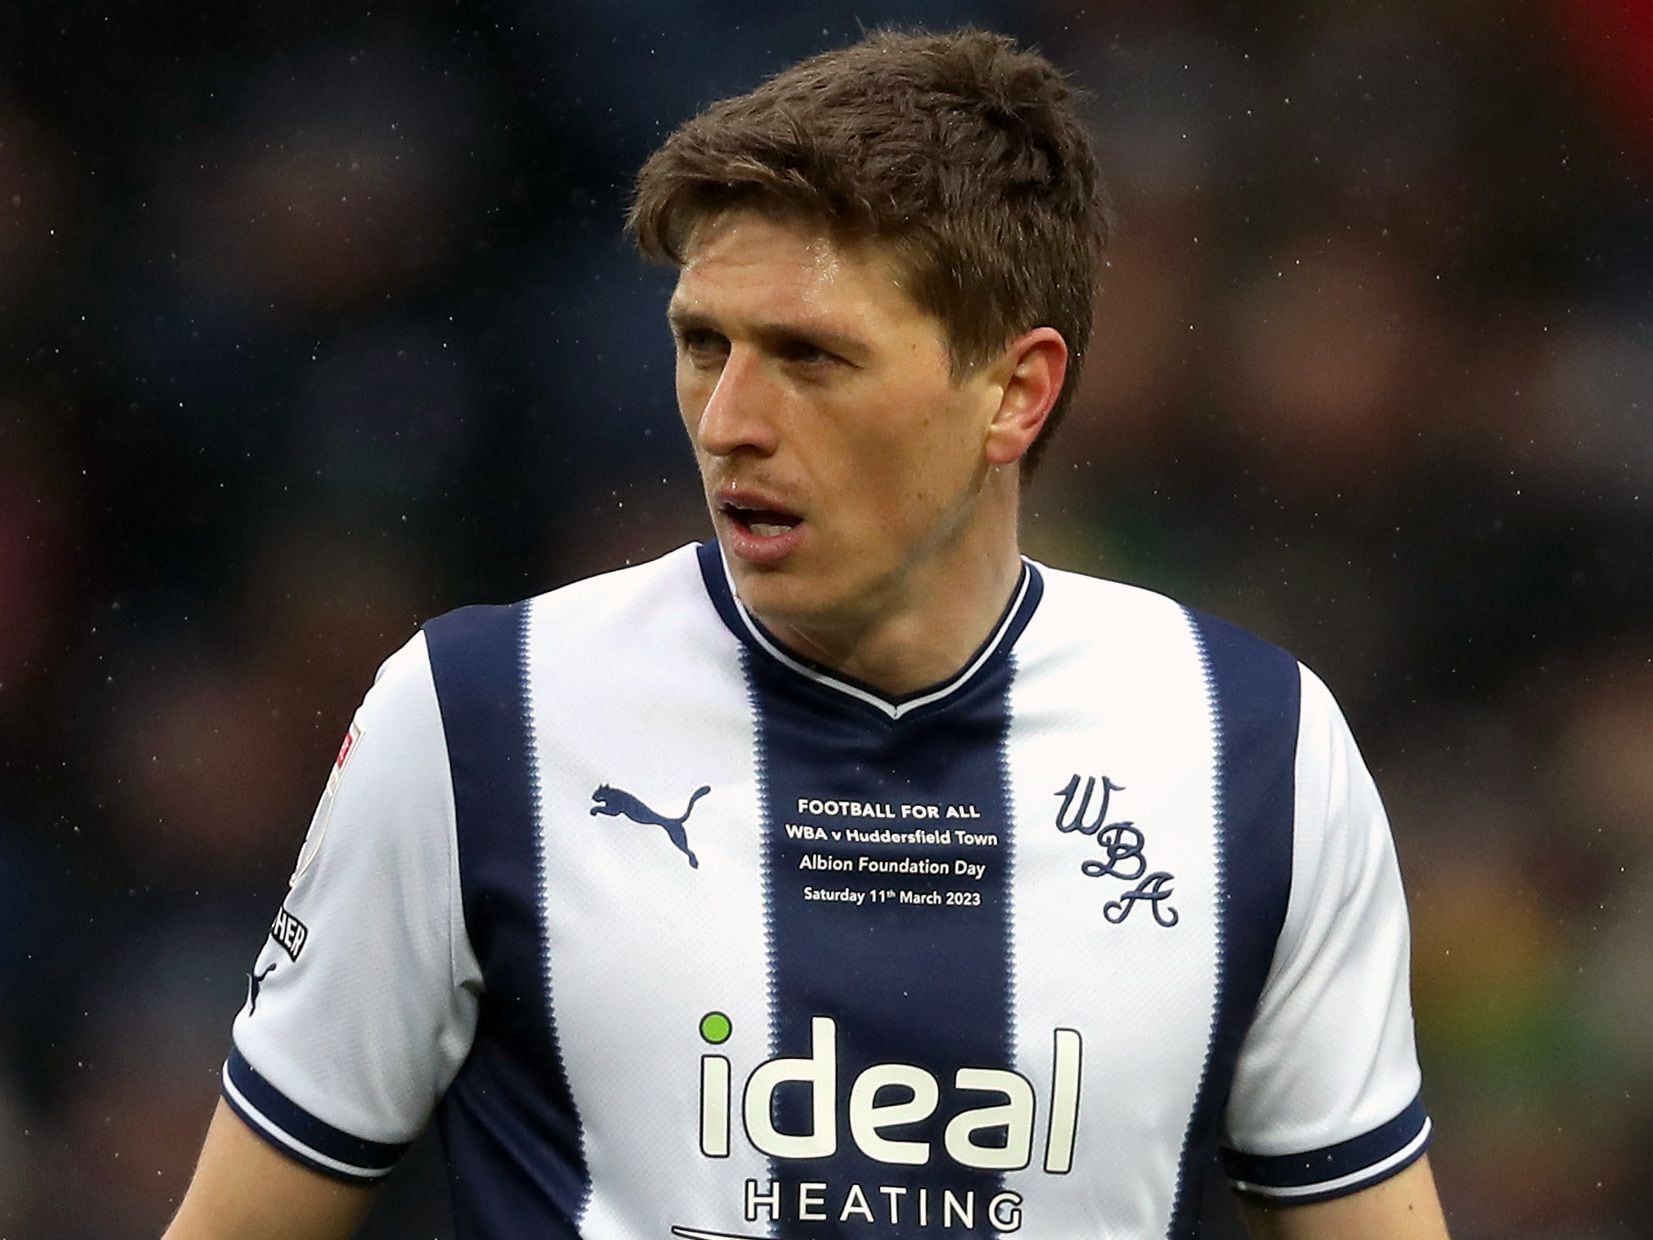 West Brom's Adam Reach ruled out for rest of season